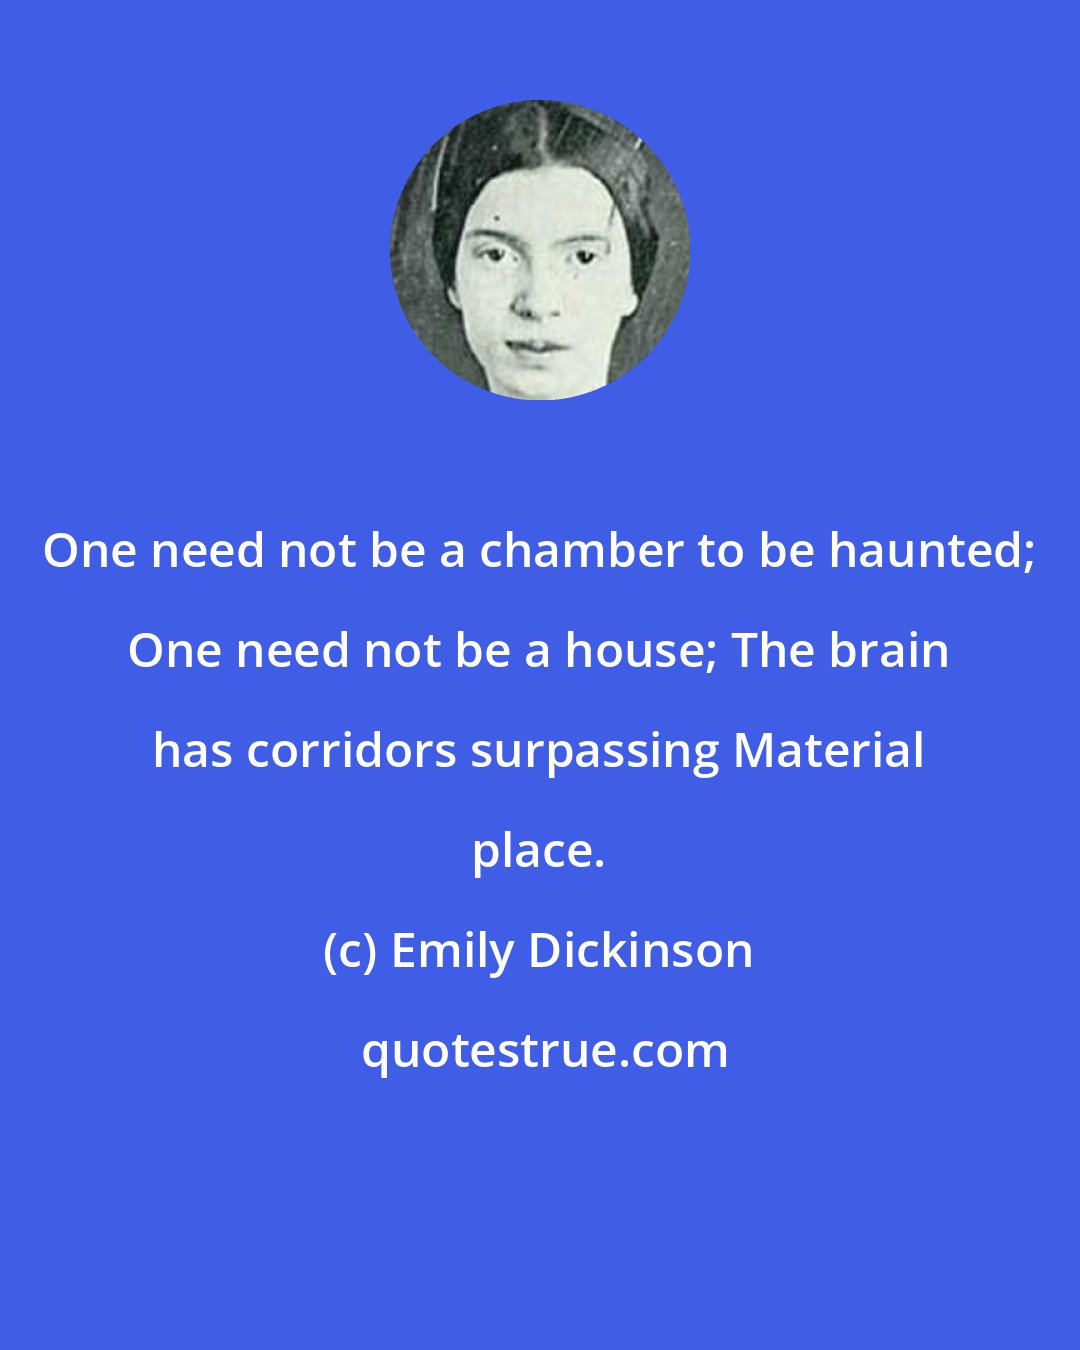 Emily Dickinson: One need not be a chamber to be haunted; One need not be a house; The brain has corridors surpassing Material place.